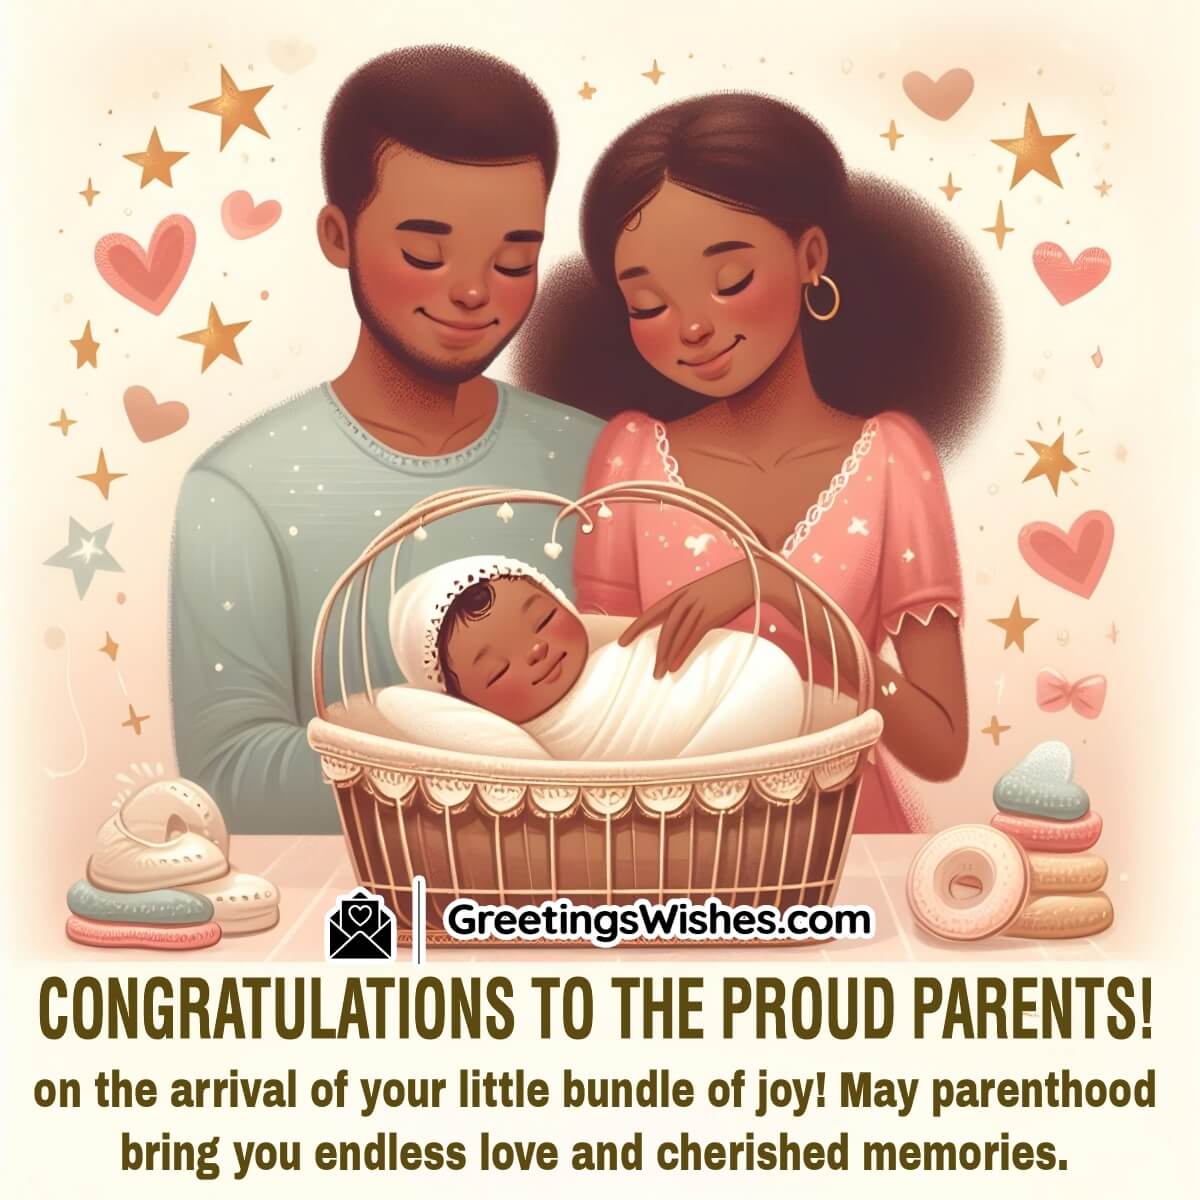 Welcoming Parenthood: Congratulations to the Proud Parents!